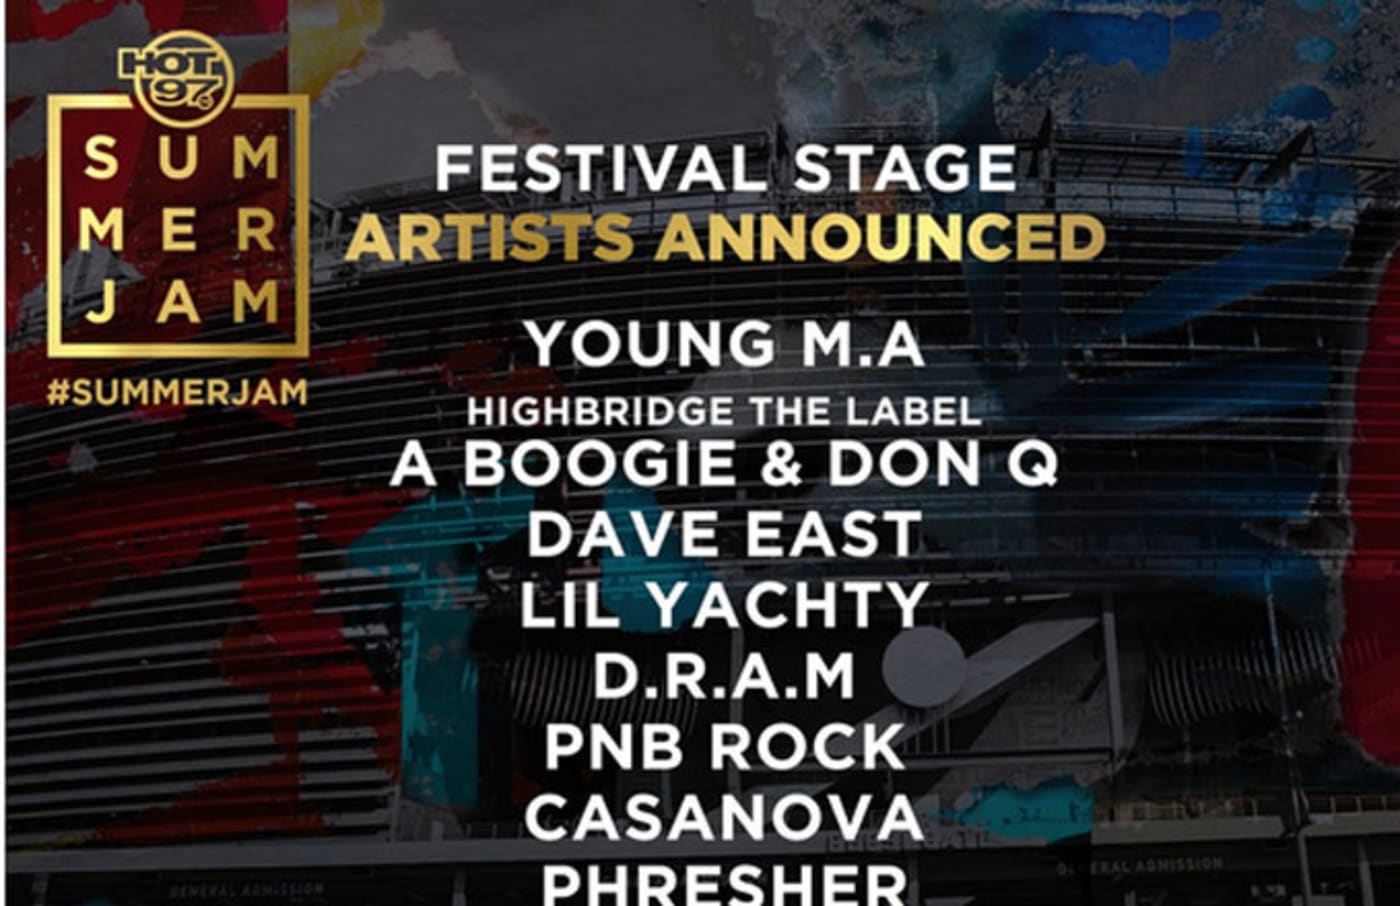 Hot 97 announces the 2017 Festival Stage lineup for Summer Jam.